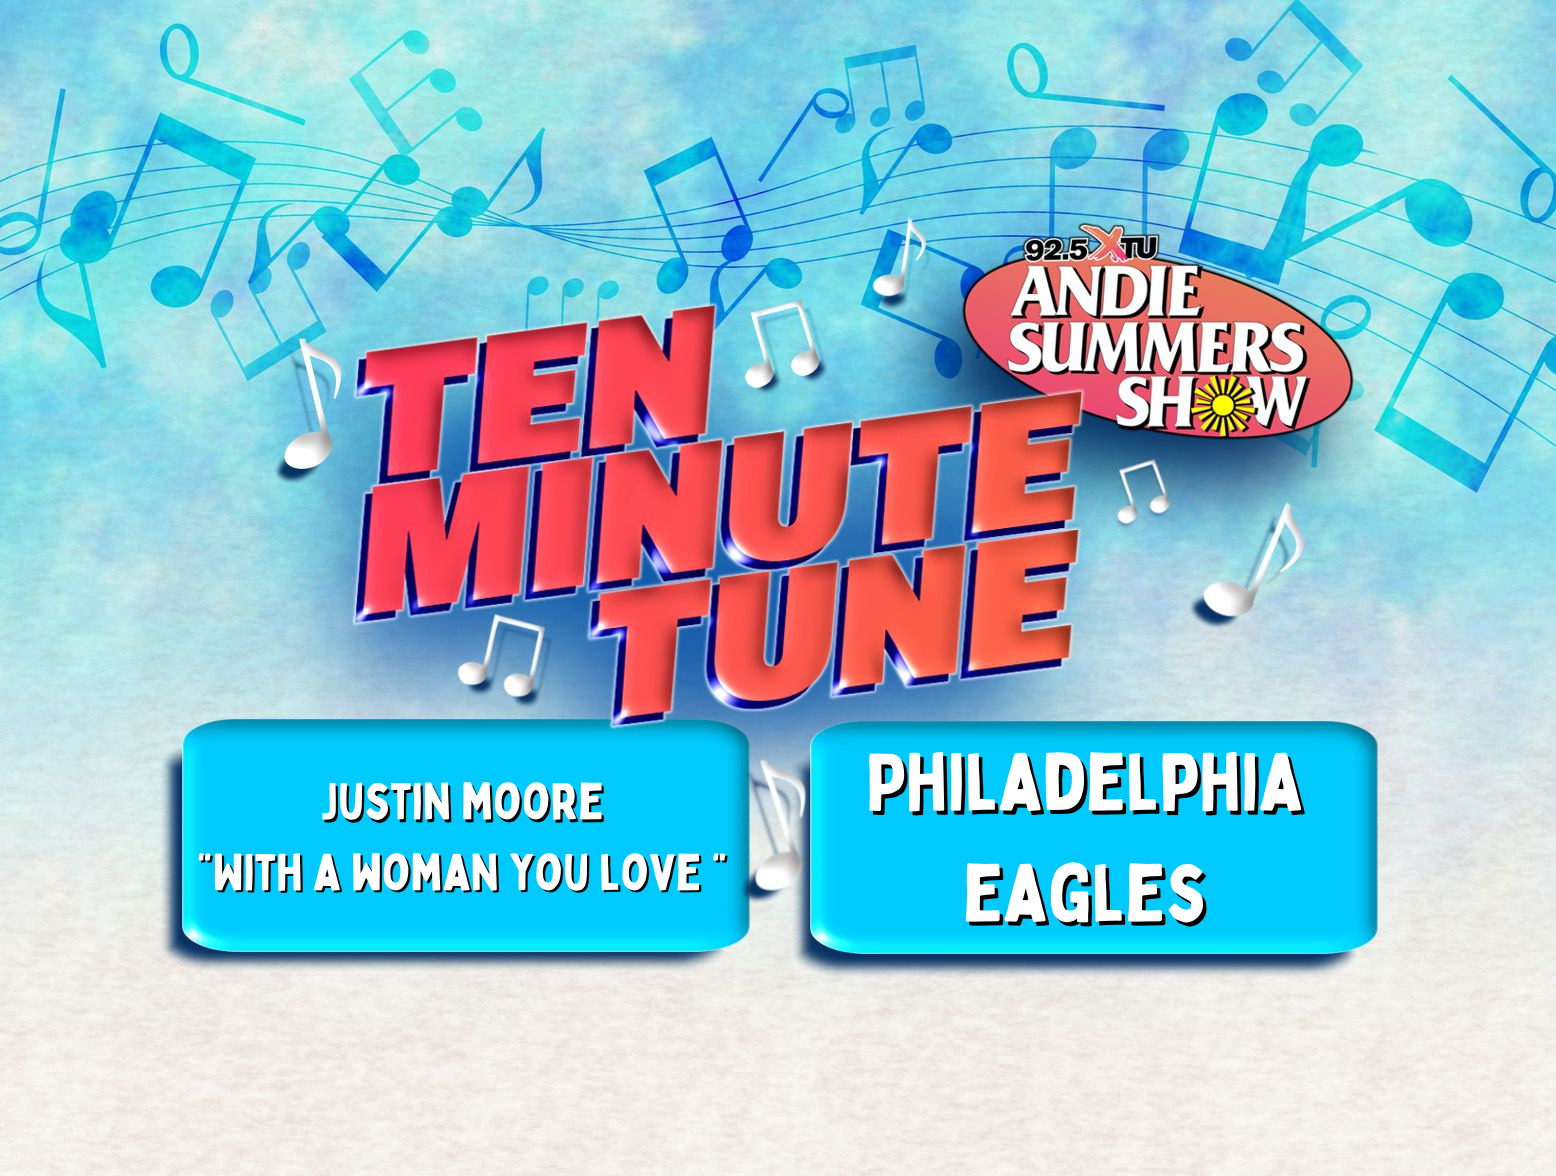 Jeff's Ten Minute Tune: "With A Woman You Love" & Philadelphia Eagles